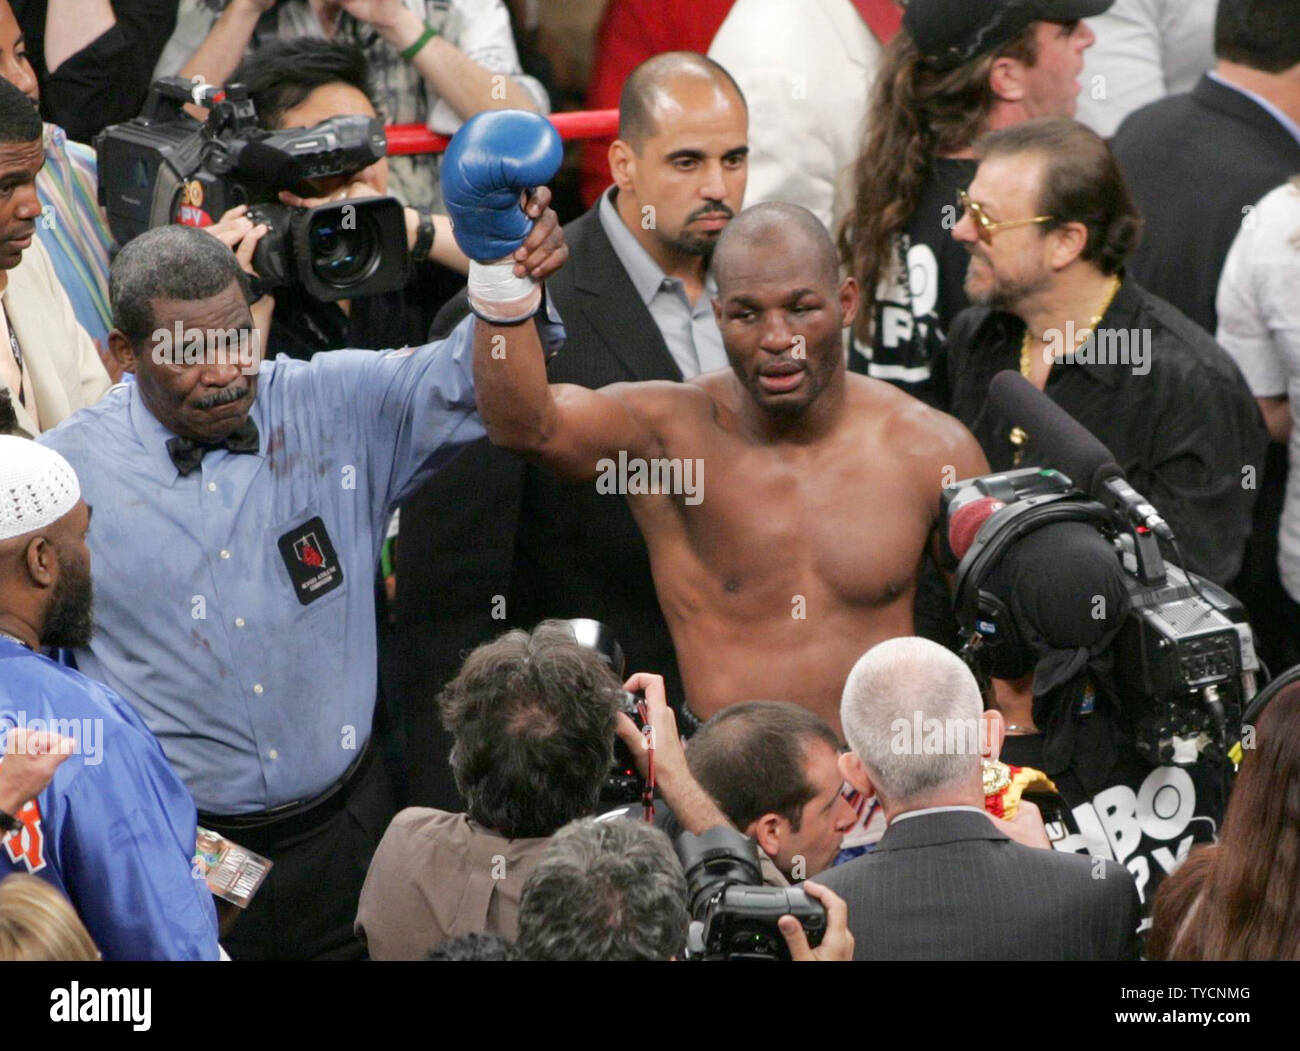 Champion Bernard Hopkins celebrates his victory over challenger Winky Wright for the Ring Magazine Light Heavyweight title at  Mandalay Bay in Las Vegas on July 21, 2007. Hopkins won by decision.  (UPI Photo/Roger Williams) Stock Photo